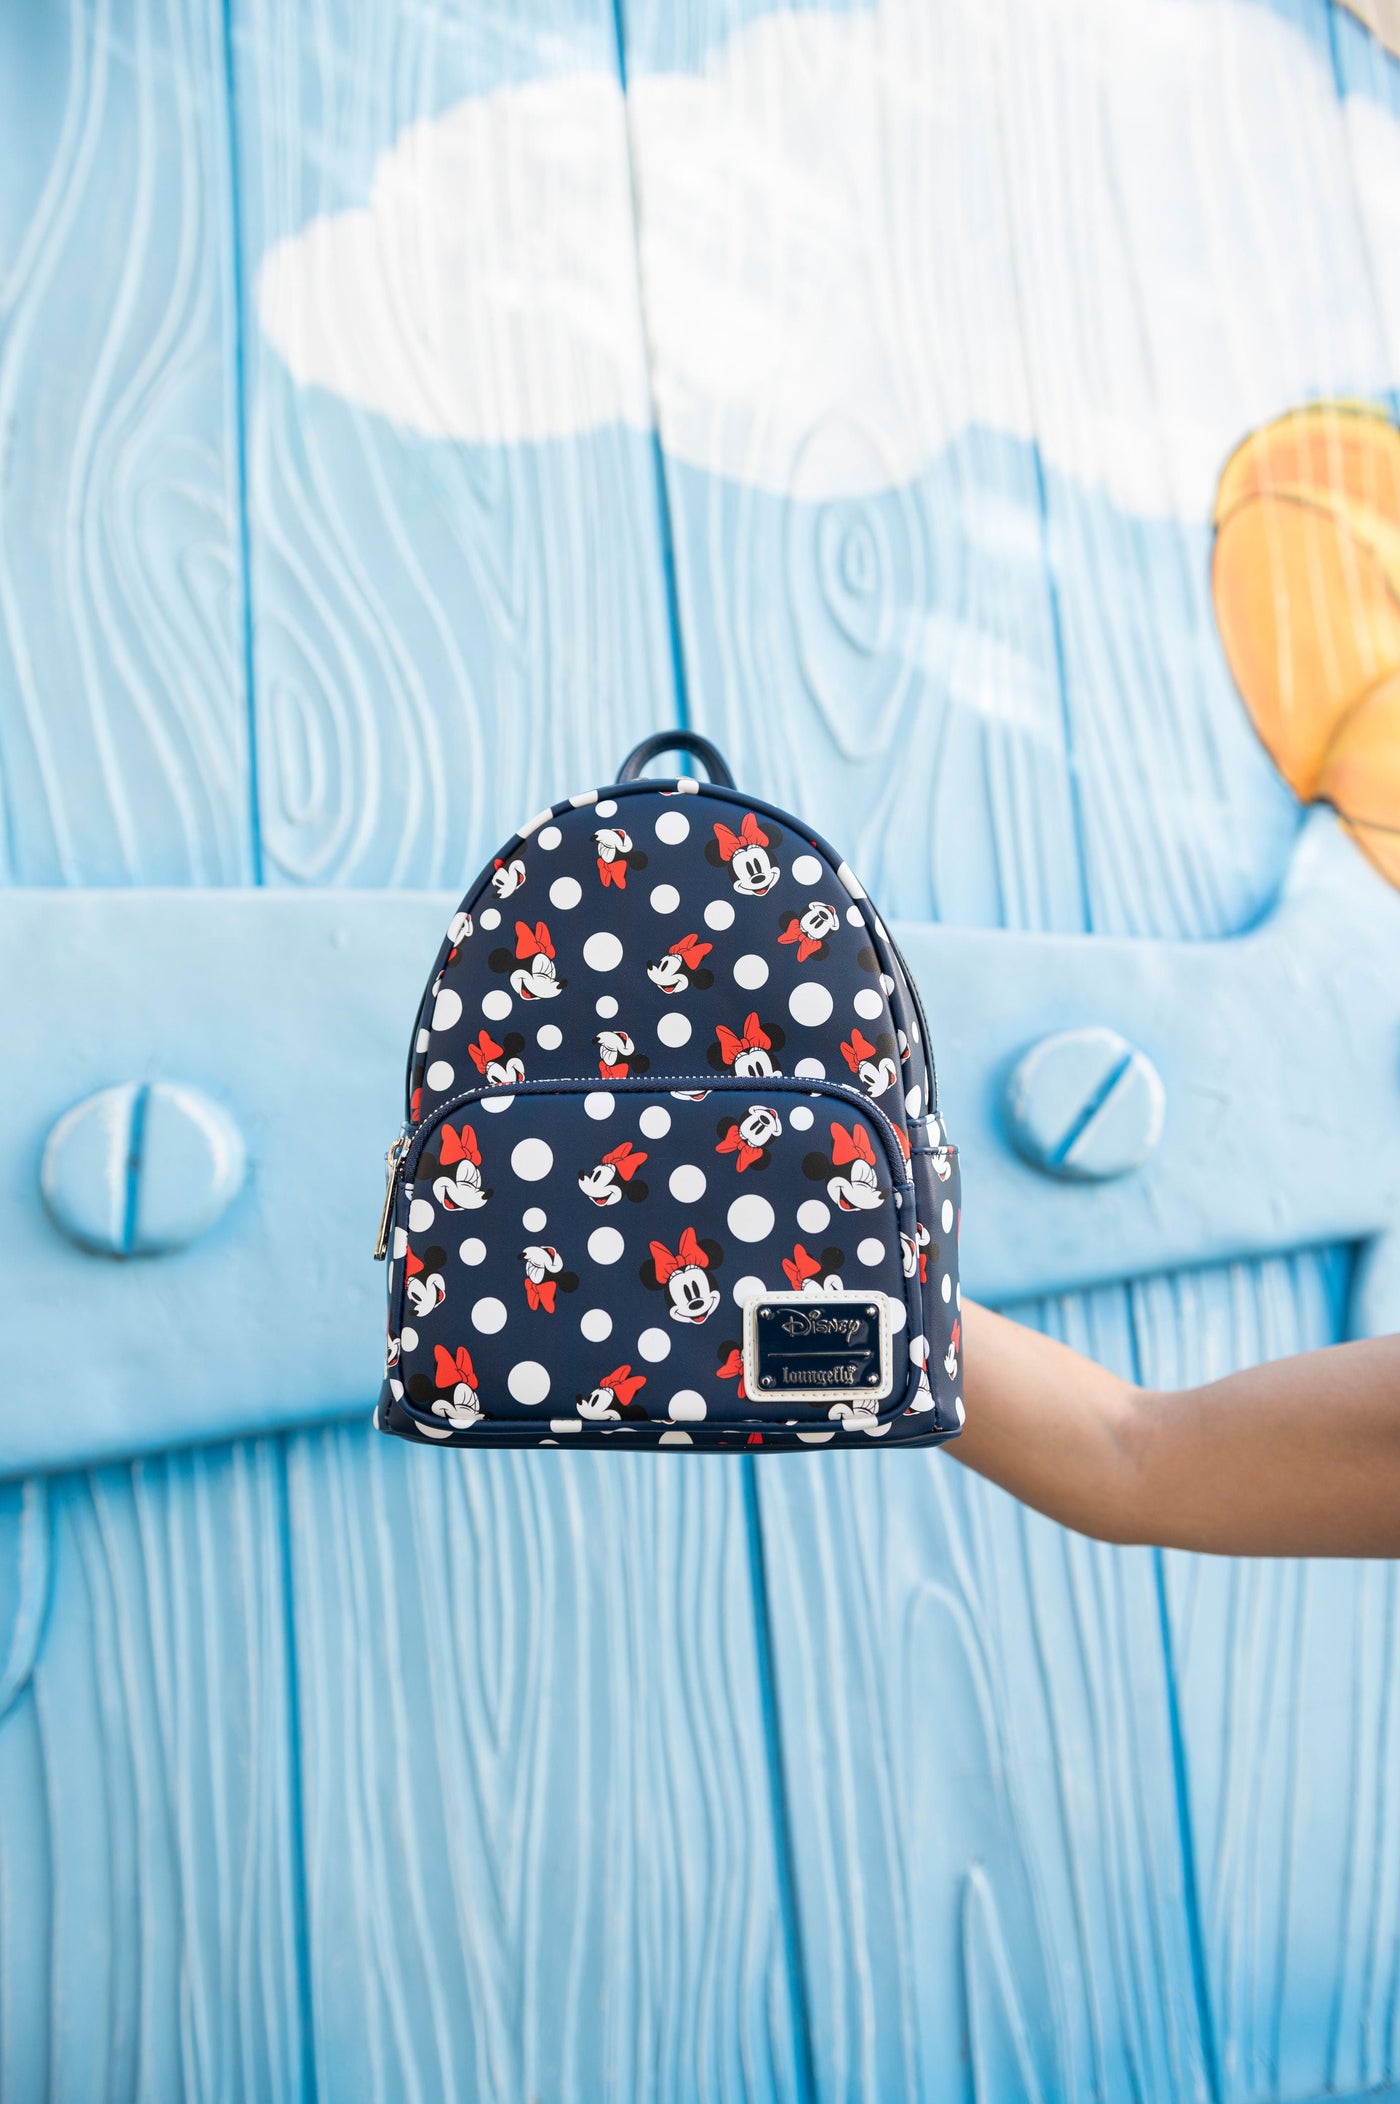 707 Street Exclusive - Loungefly Disney Minnie Mouse Polka Dot Navy Mini Backpack  - IRL Front